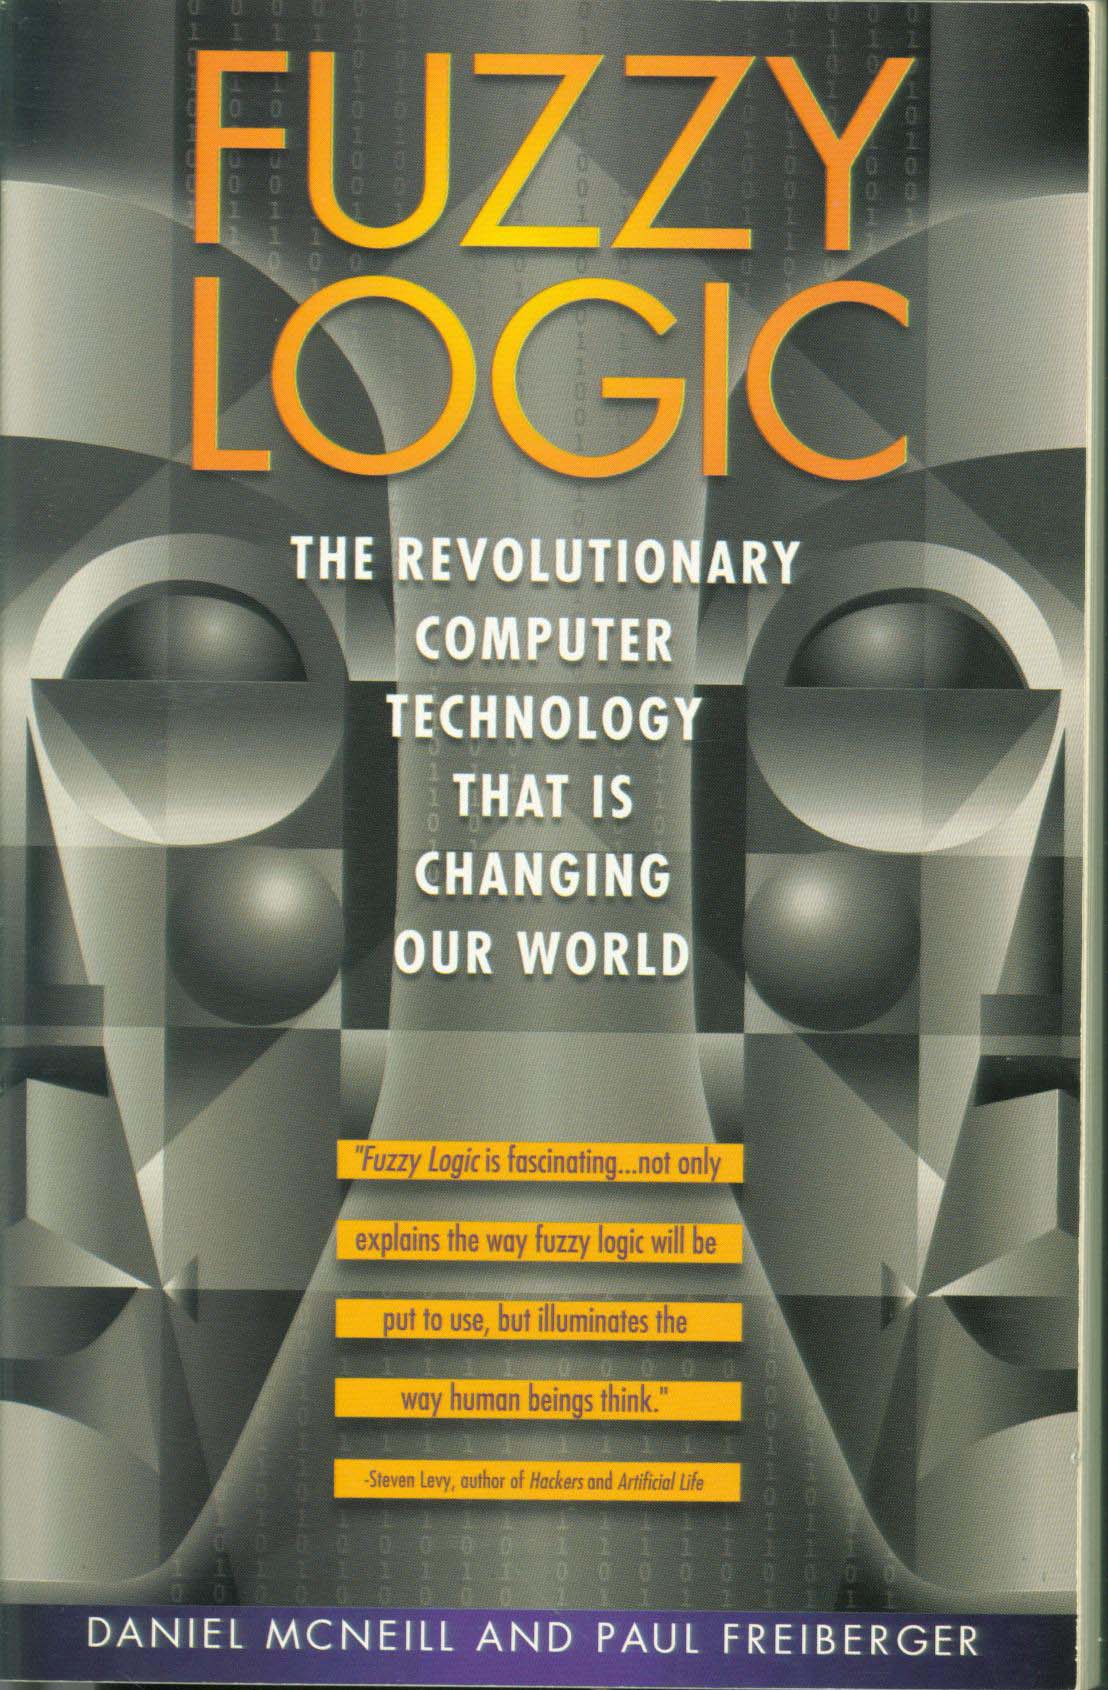 FUZZY LOGIC: the revolutionary technology that is changing our world--paper.